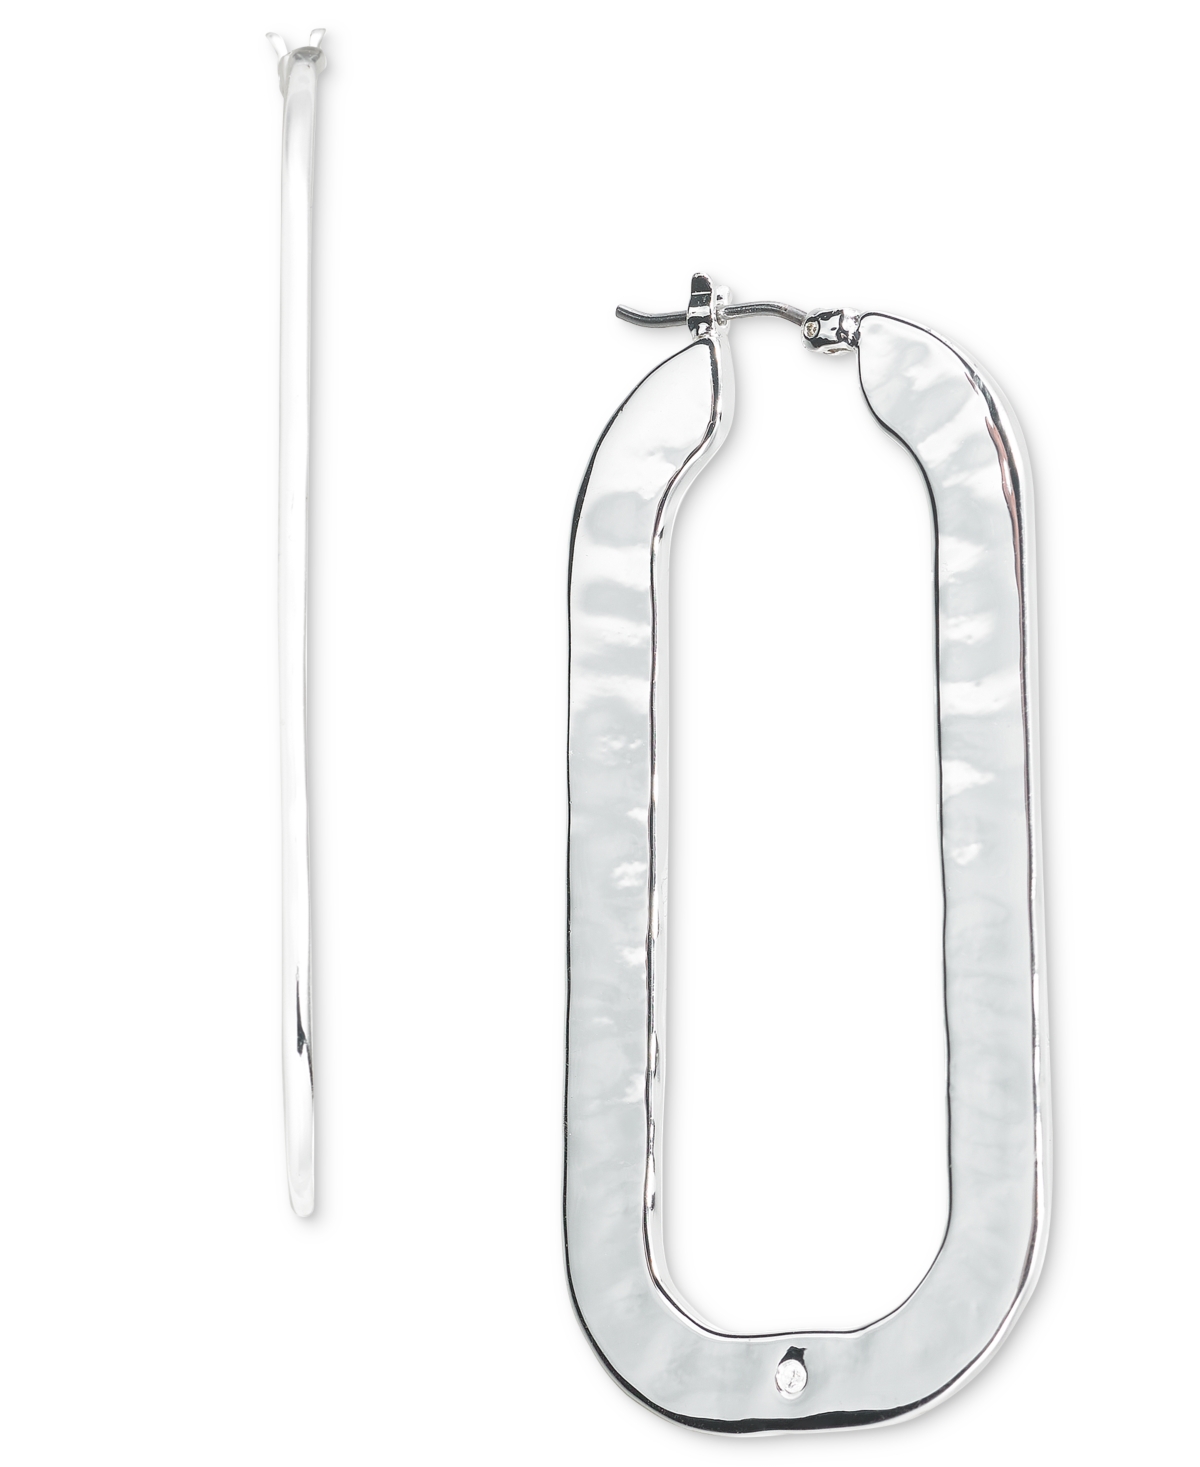 Silver-Tone Rounded Rectangle Hoop Earrings, Created for Macy's - Silver